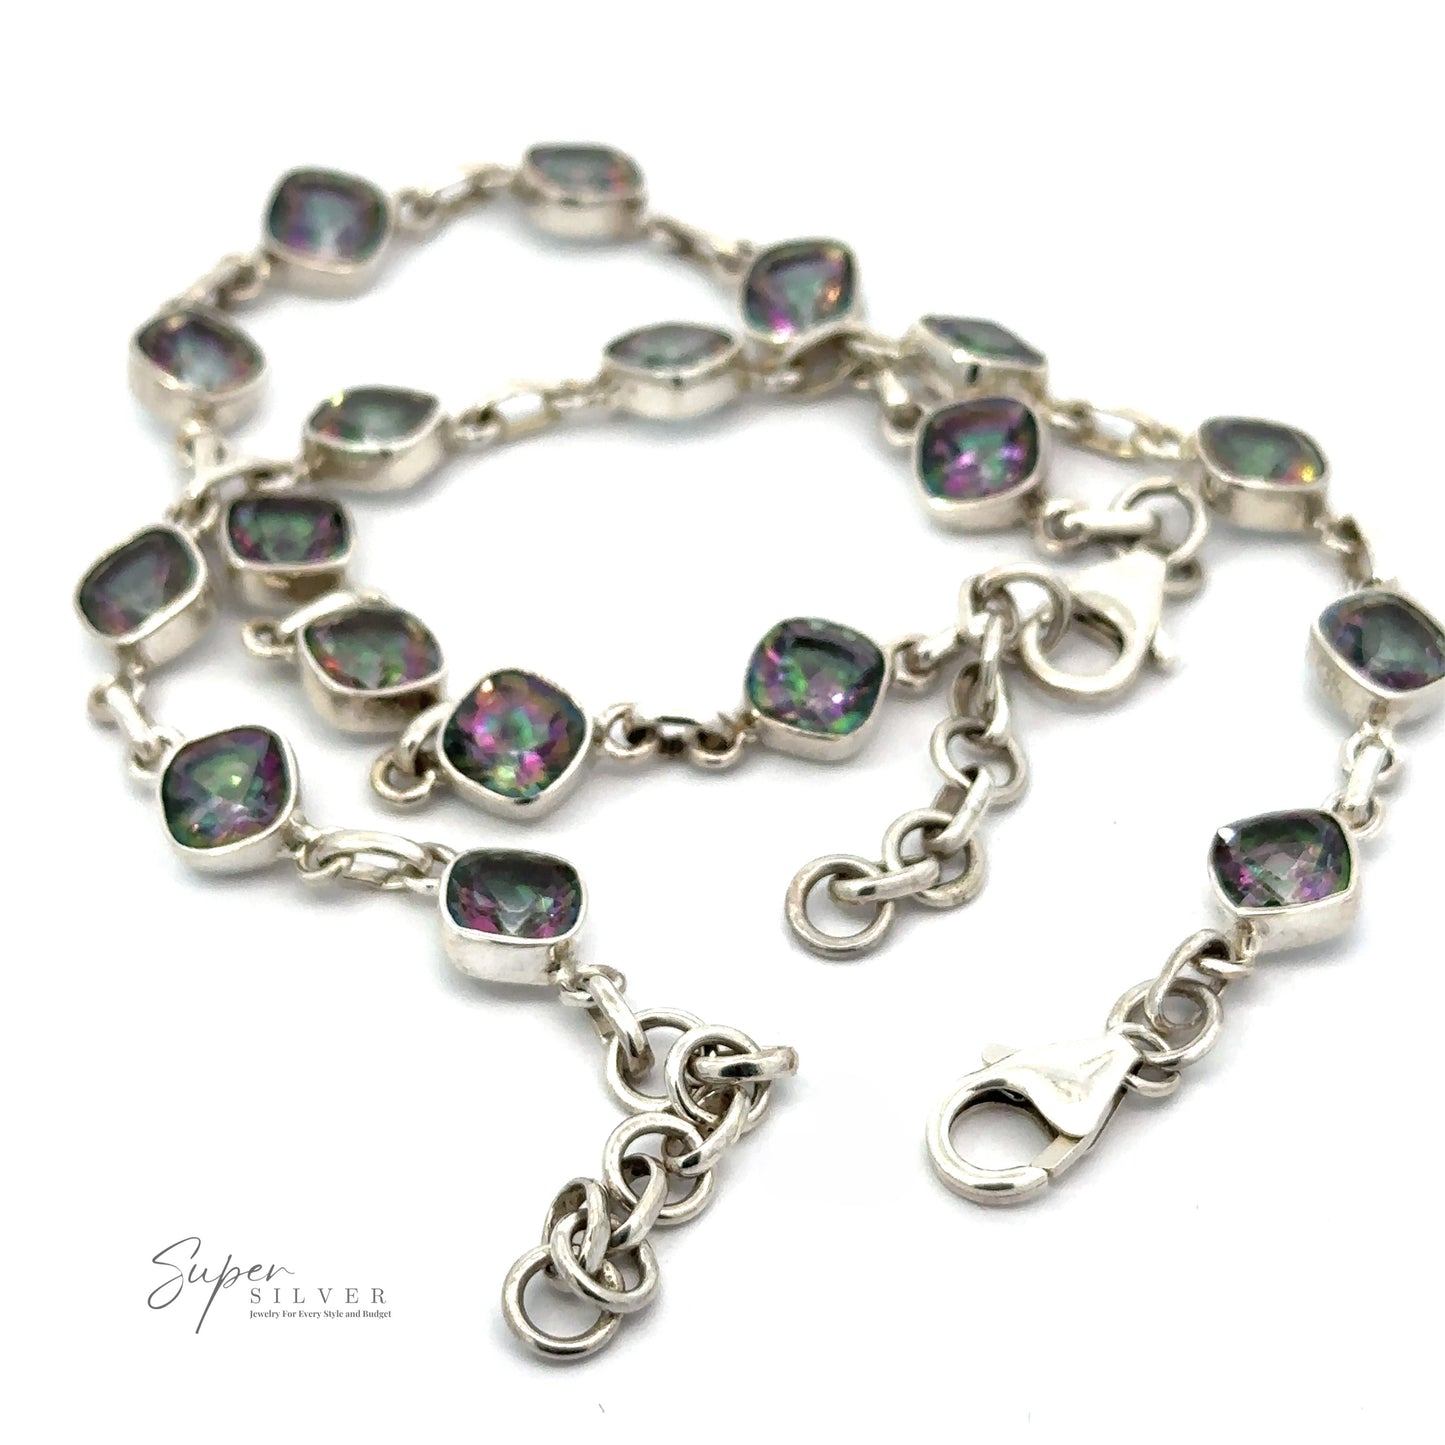 
                  
                    A Rainbow Mystic Topaz Diamond Link Bracelet with rectangular multicolored gemstone links, featuring a lobster clasp closure, displayed against a white background. "Super Silver" branding is visible in the bottom left corner.
                  
                